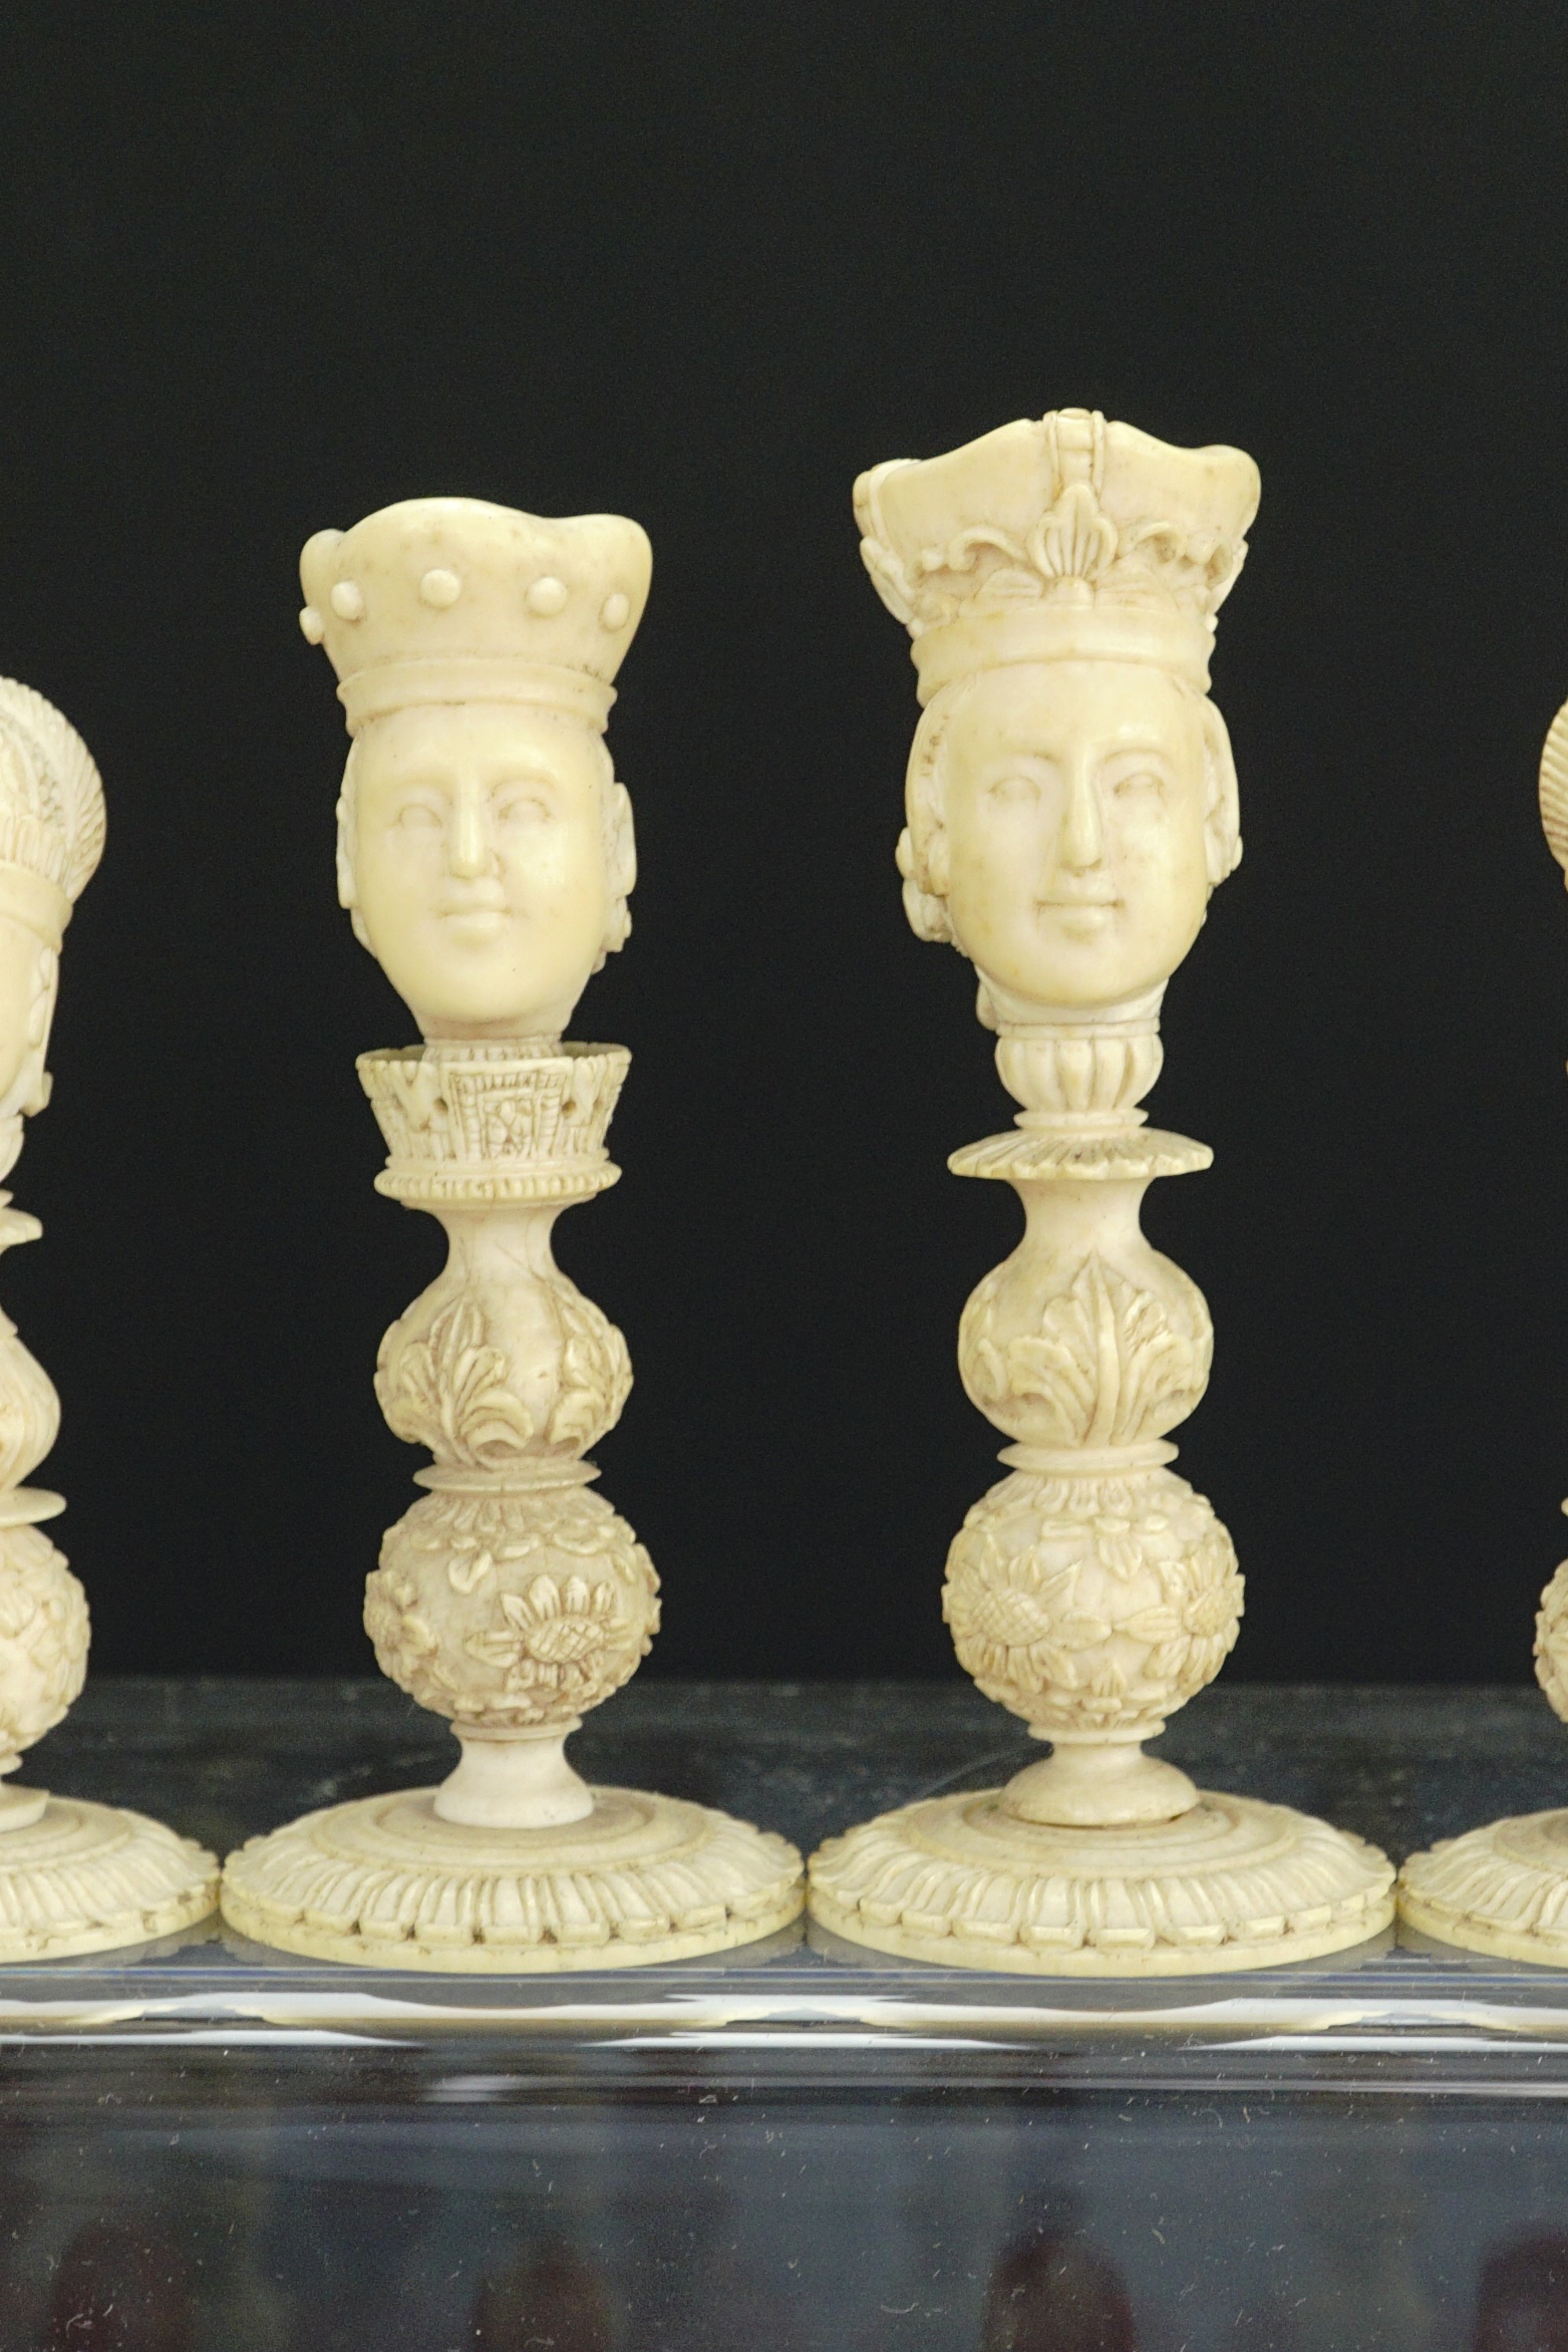 A late 18th / early 19th Century Chinese / Canton export ivory chess set, likely Macau, Kings - Image 3 of 7